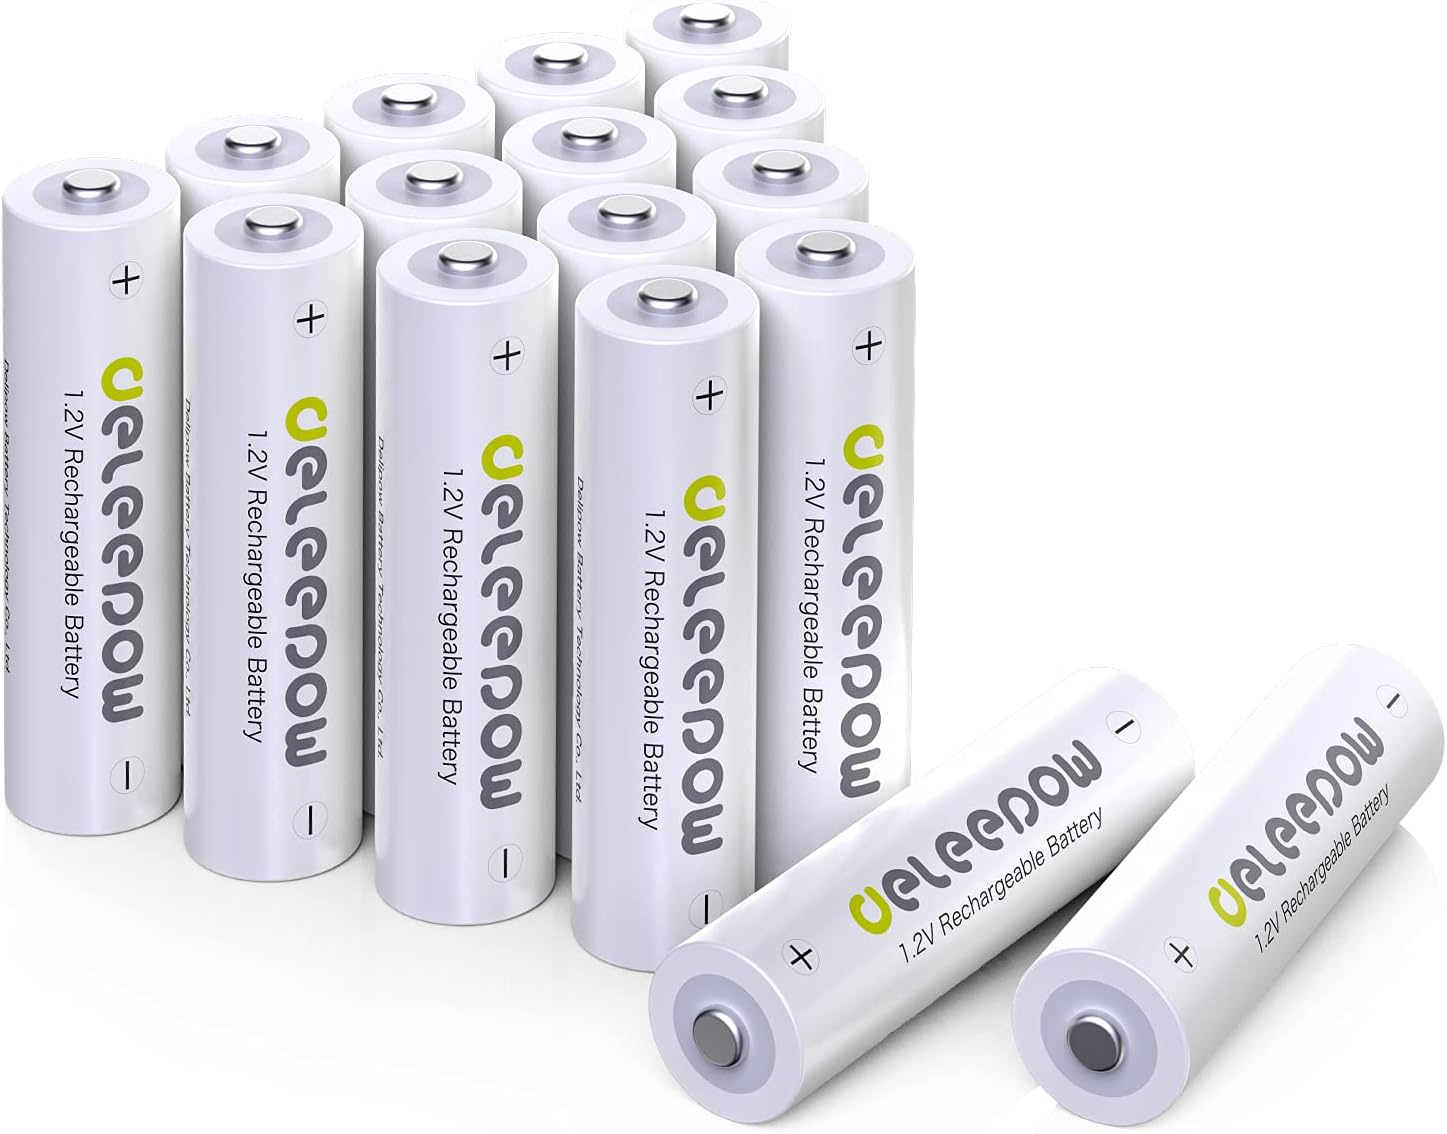 Looking to Buy Rechargeable AA Batteries. Here